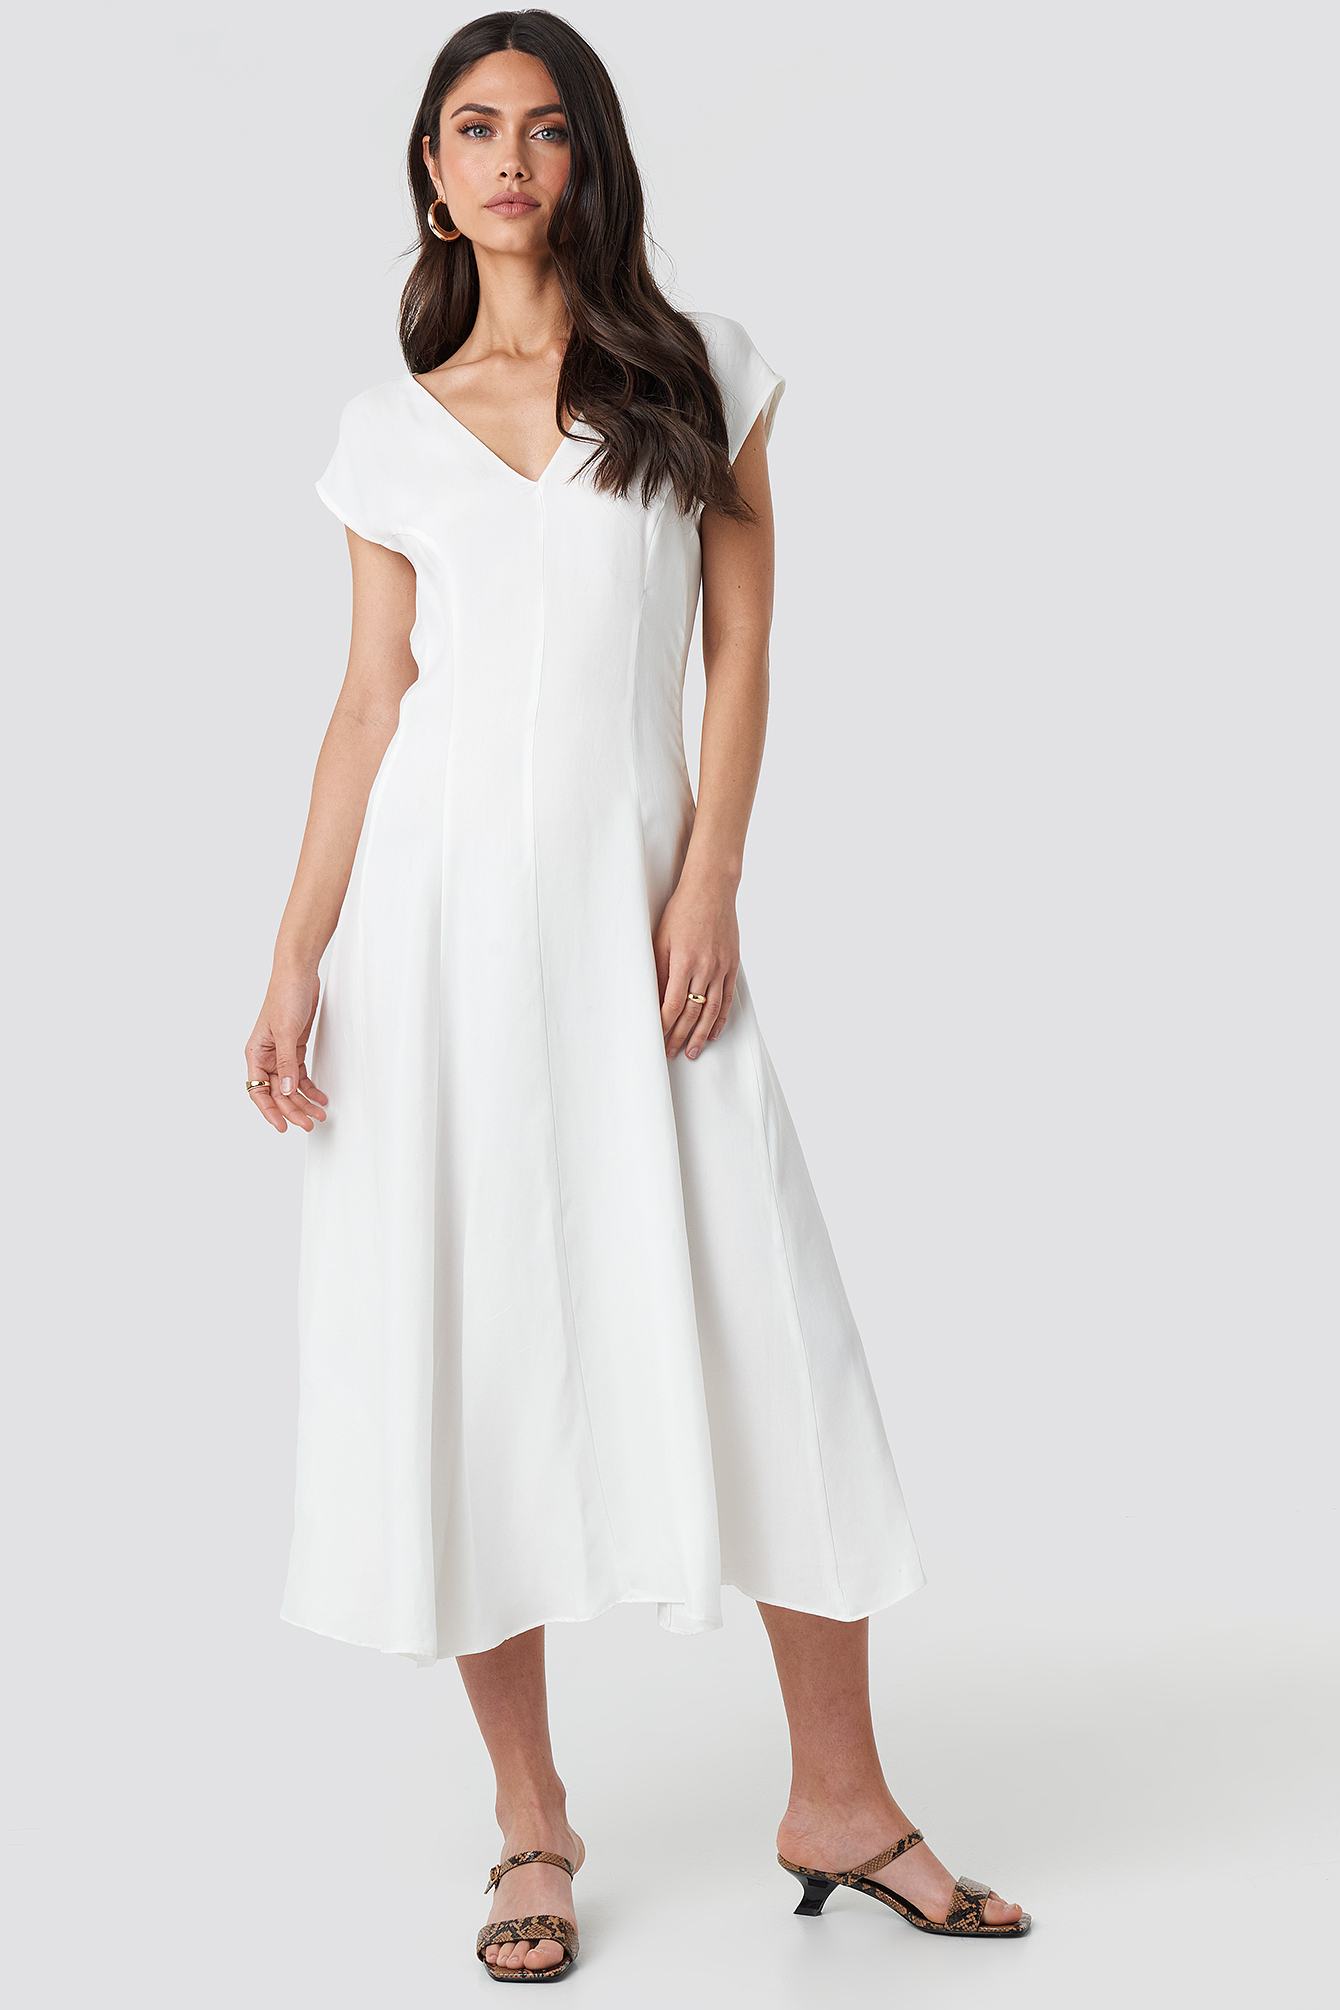 looking for white dresses